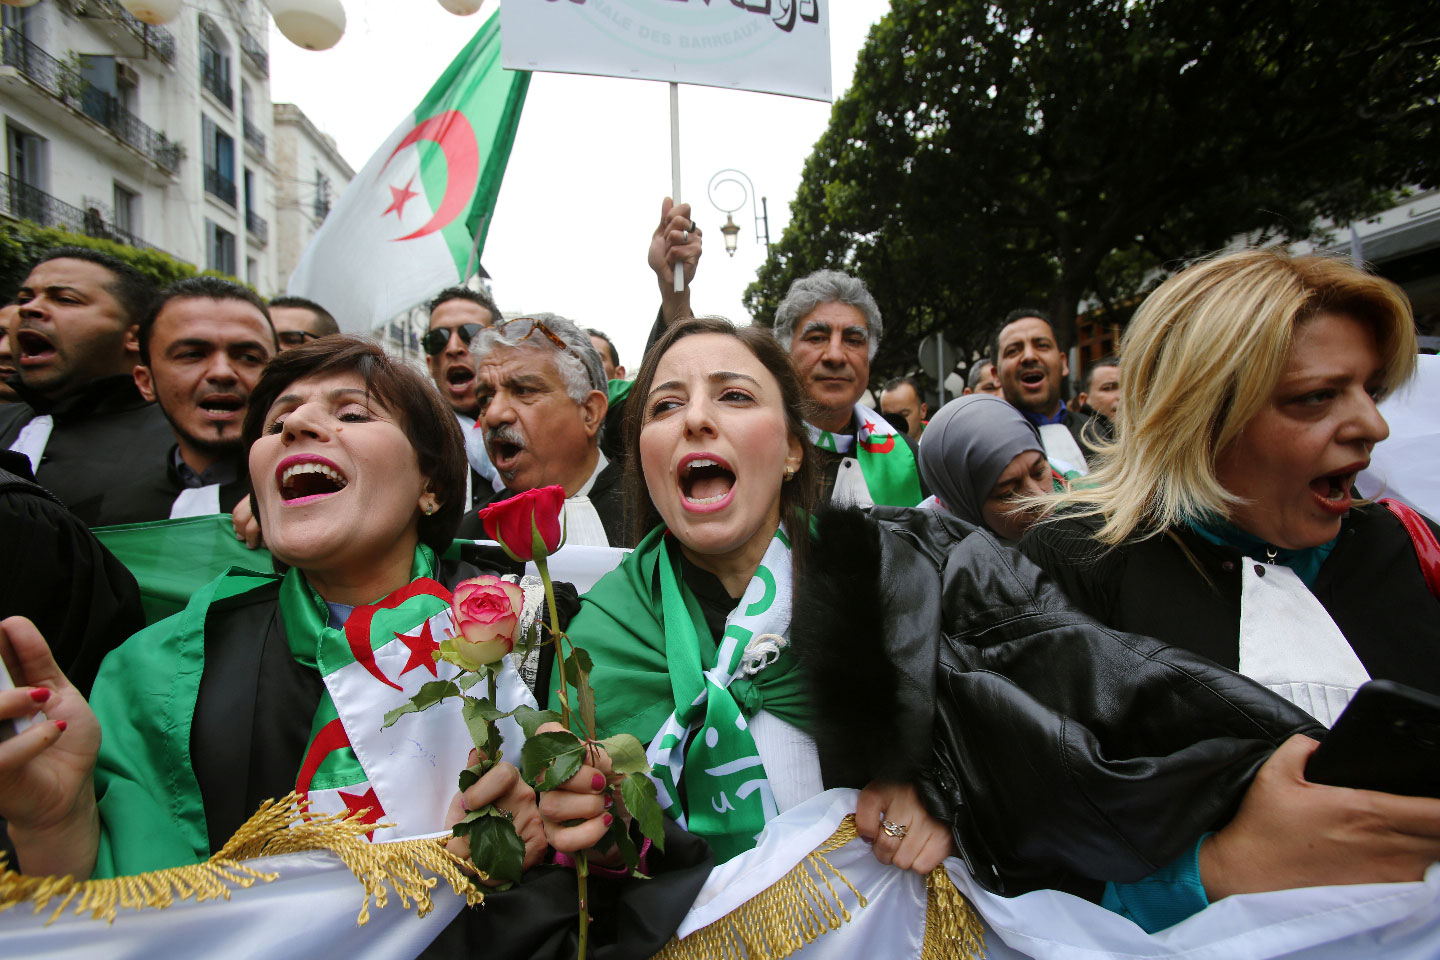 Lawyers carry national flags and flowers as they march during a protest to demand the immediate resignation of President Abdelaziz Bouteflika, in Algiers, Algeria March 23, 2019.